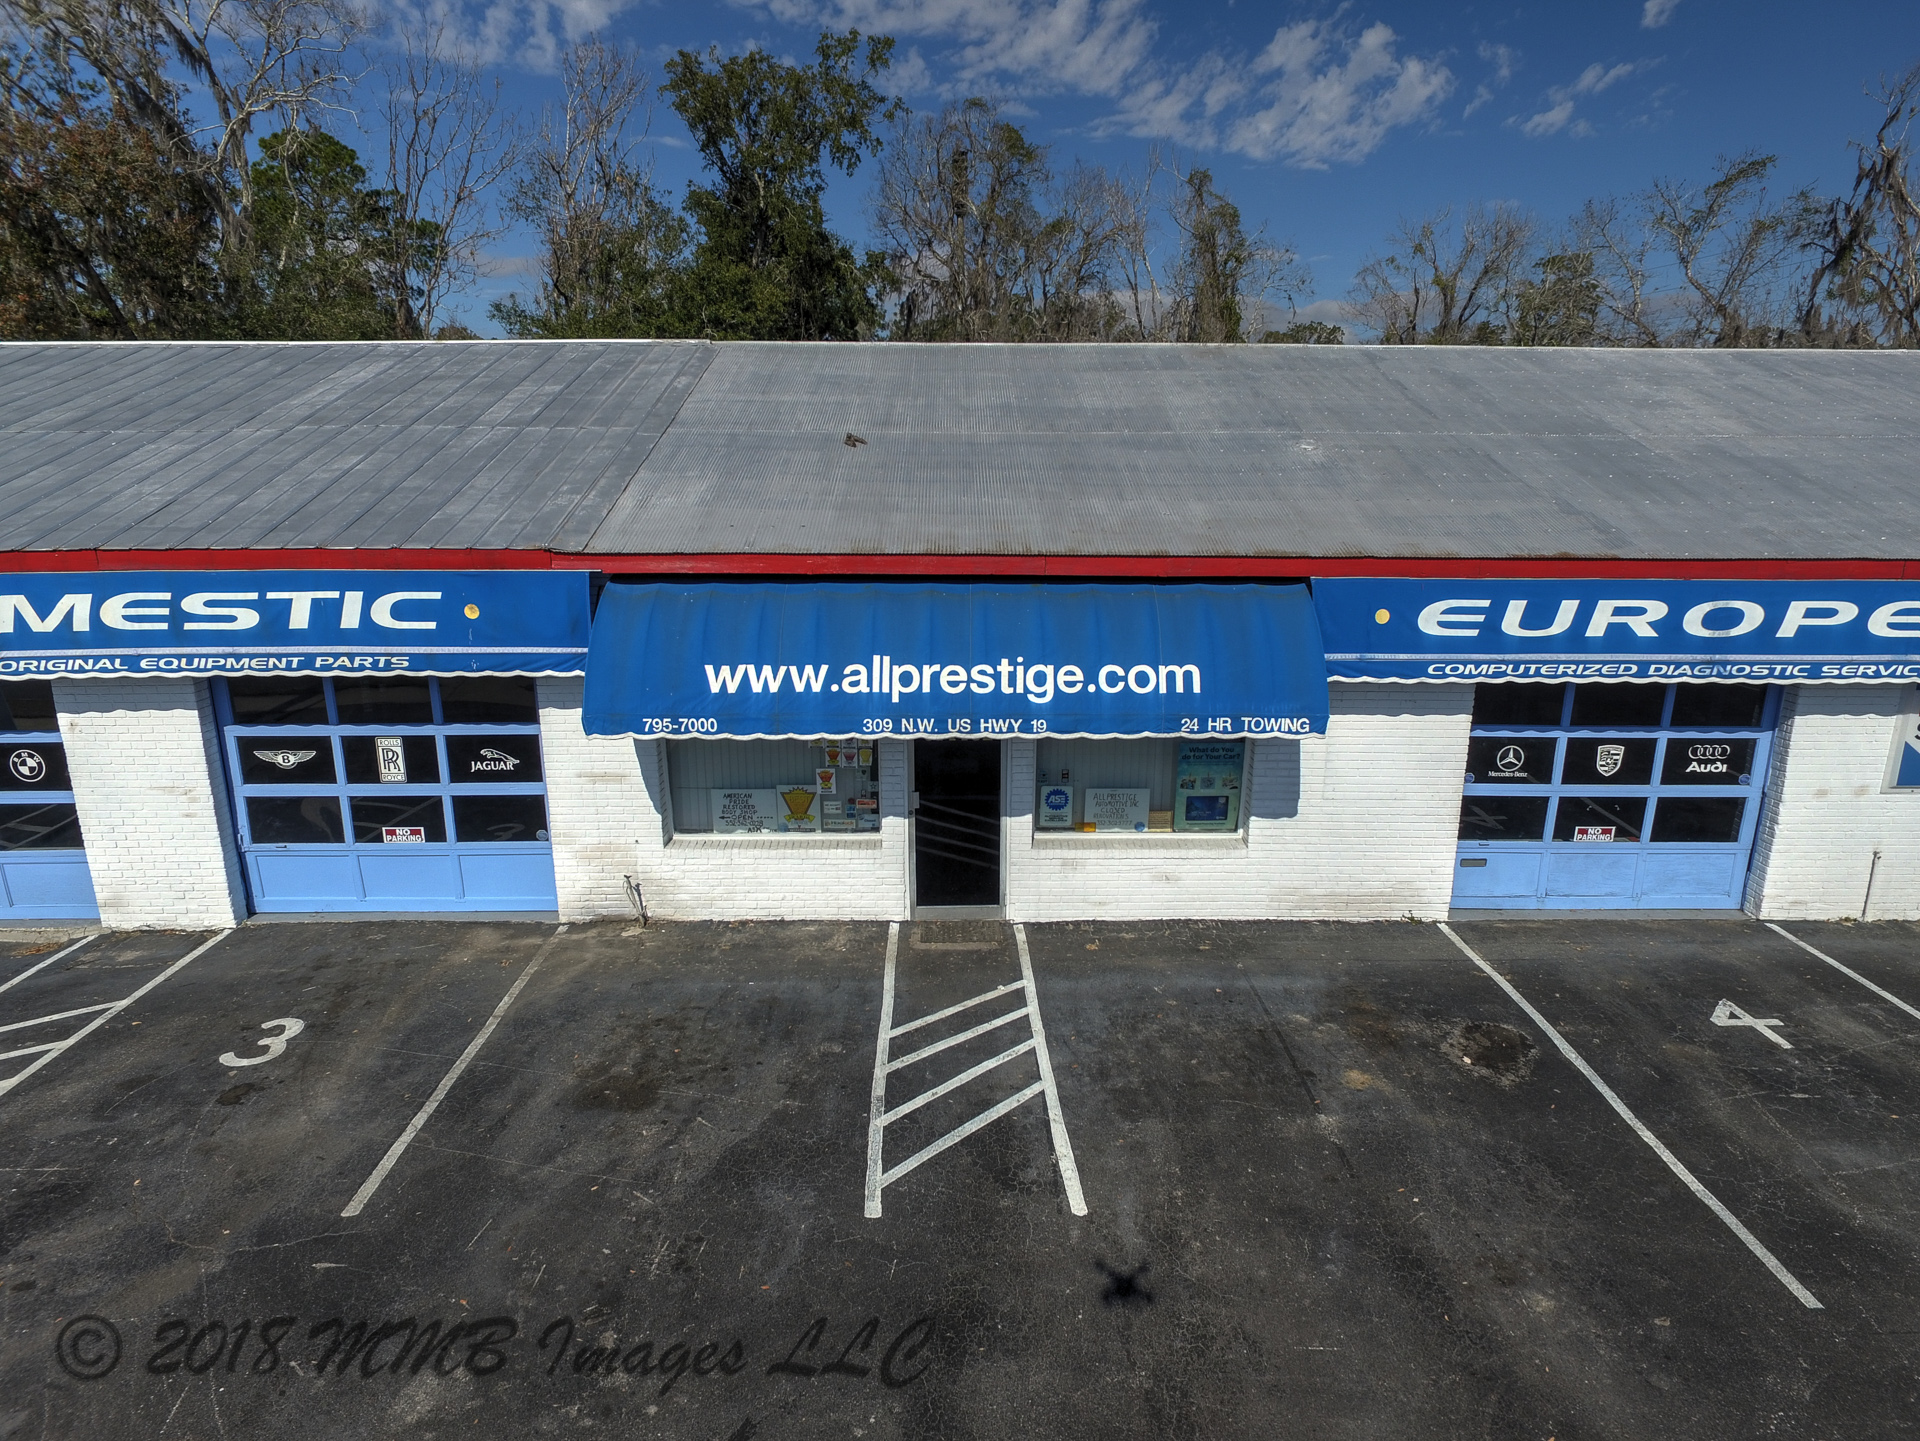 Listing Photo for Car Repair Shop Business Opportunity and Real Estate for Sale in Crystal River, Citrus County